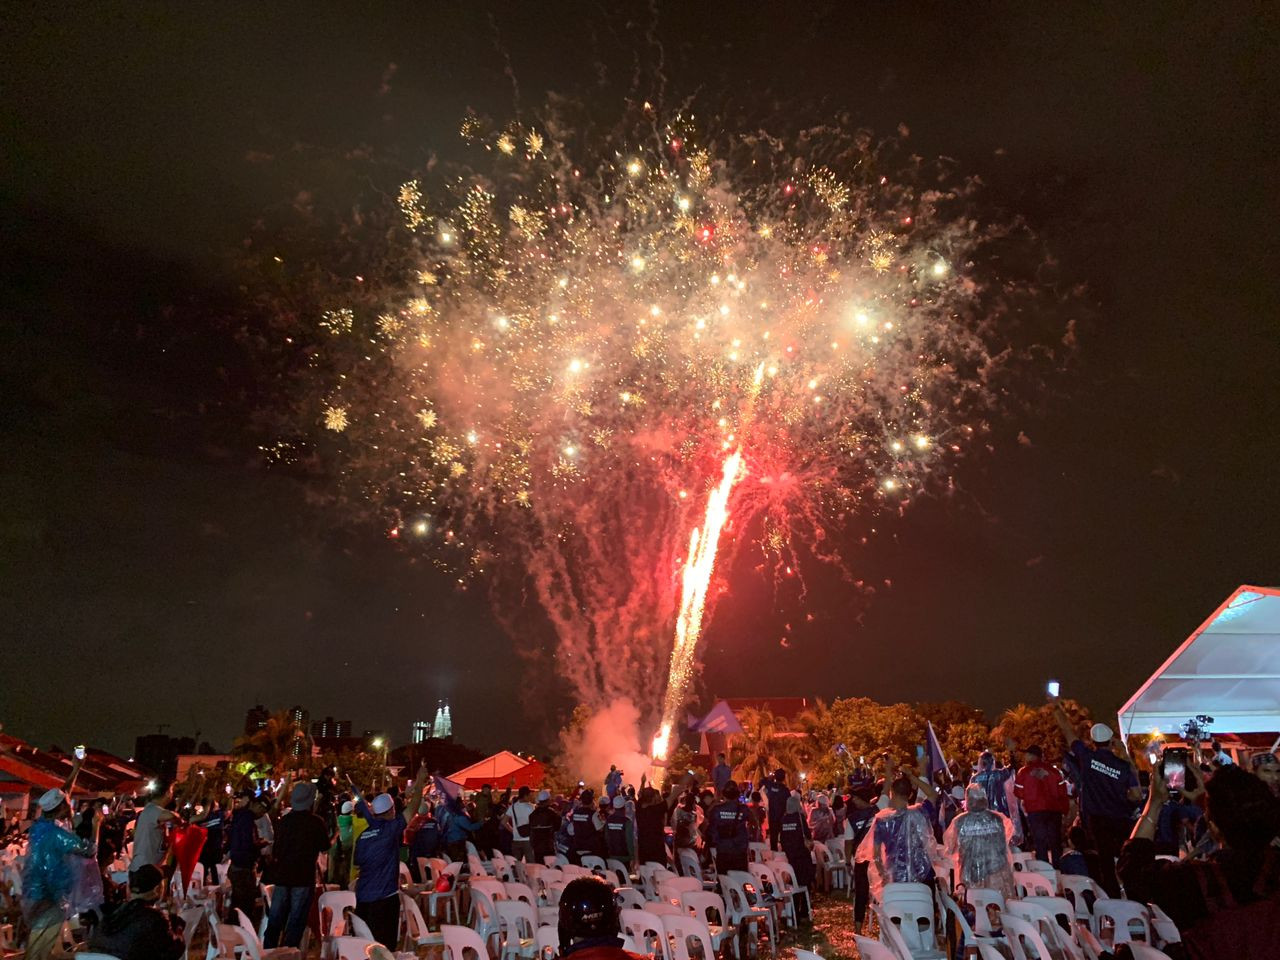 Fireworks topping off the event at around 11.10pm. – AMAR SHAH MOHSEN/The Vibes, November 14, 2022